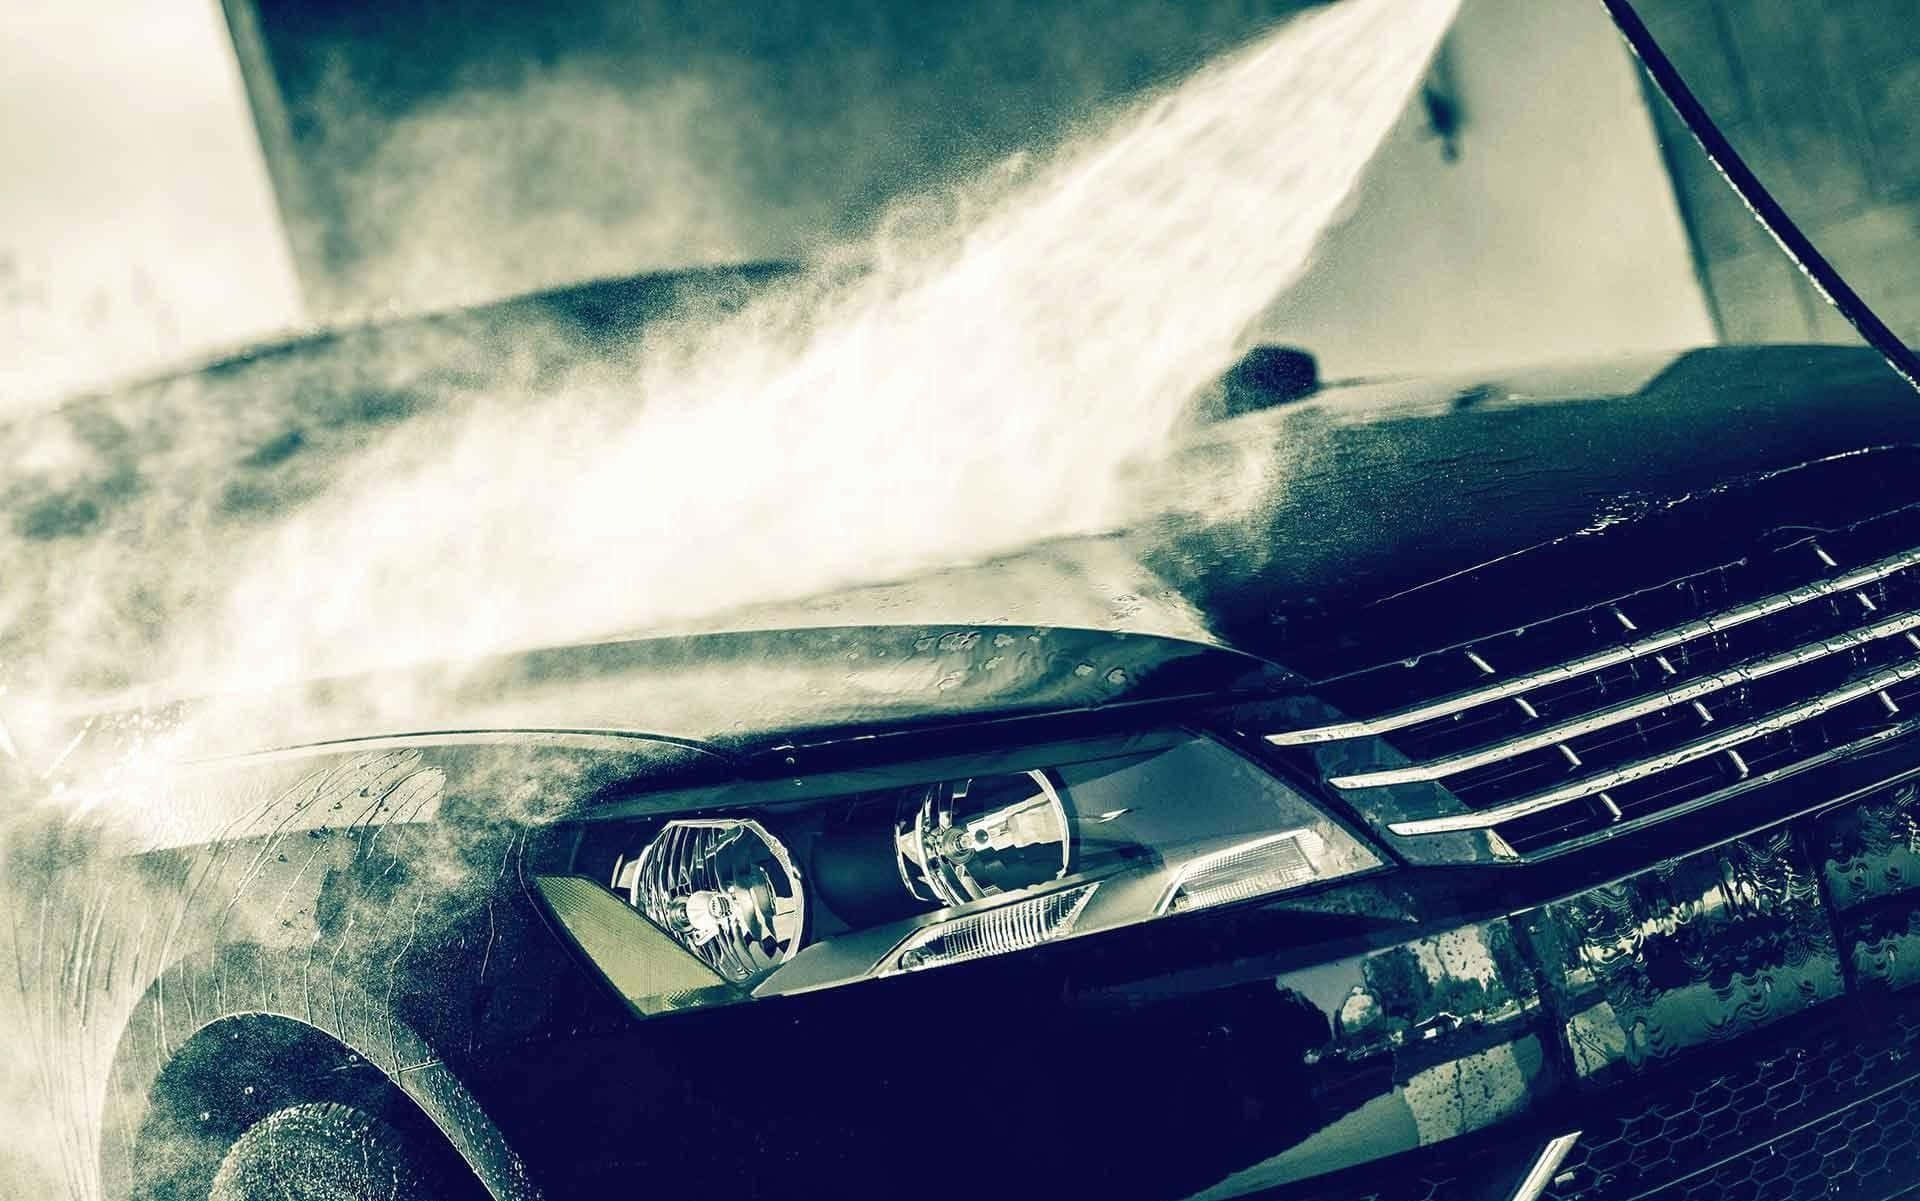 Keep your car clean with a thorough wash!